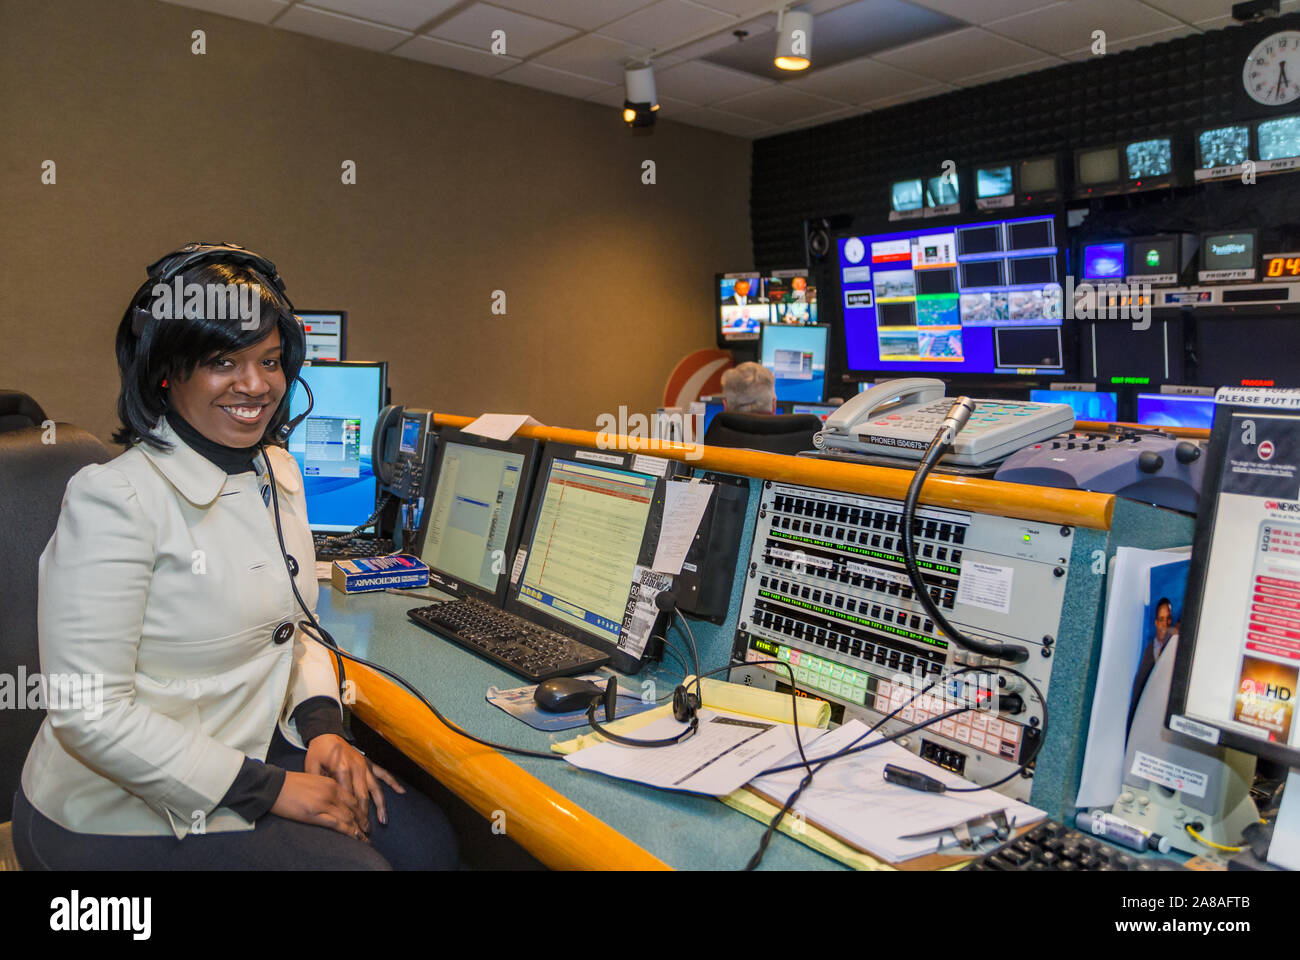 Aretha Frison sits inside the control room at WDSU-TV station in New Orleans, Louisiana, Feb. 28, 2014. Frison works as a news producer at WDSU. Stock Photo